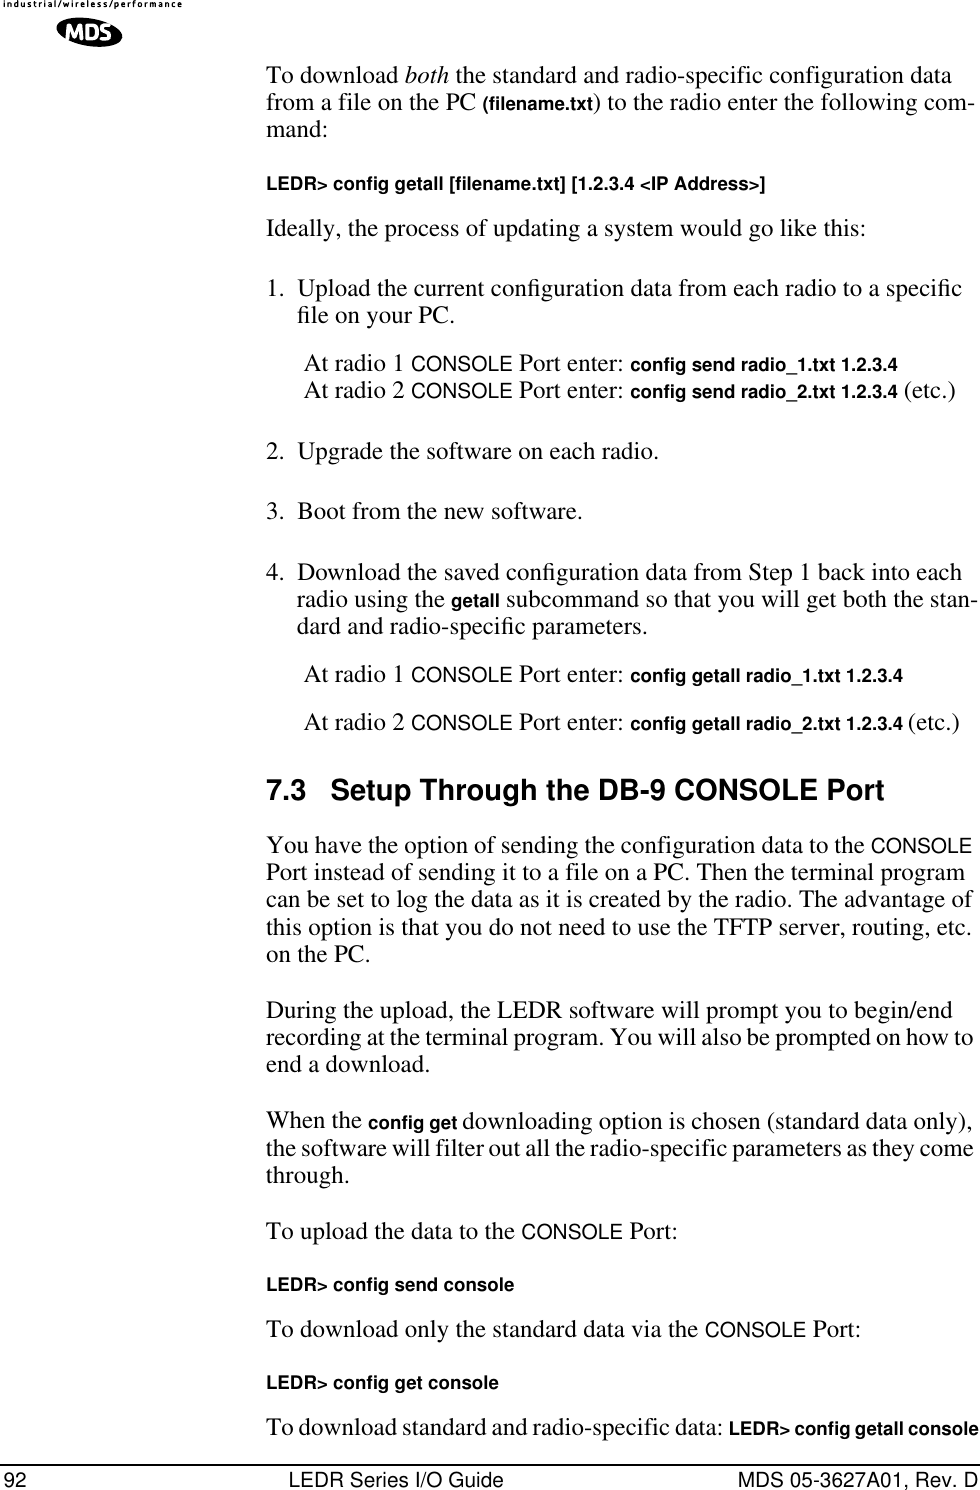 92 LEDR Series I/O Guide MDS 05-3627A01, Rev. DTo download both the standard and radio-specific configuration data from a file on the PC (filename.txt) to the radio enter the following com-mand:LEDR&gt; conﬁg getall [ﬁlename.txt] [1.2.3.4 &lt;IP Address&gt;]Ideally, the process of updating a system would go like this:1. Upload the current conﬁguration data from each radio to a speciﬁc ﬁle on your PC.At radio 1 CONSOLE Port enter: config send radio_1.txt 1.2.3.4At radio 2 CONSOLE Port enter: config send radio_2.txt 1.2.3.4 (etc.)2. Upgrade the software on each radio.3. Boot from the new software.4. Download the saved conﬁguration data from Step 1 back into each radio using the getall subcommand so that you will get both the stan-dard and radio-speciﬁc parameters.At radio 1 CONSOLE Port enter: config getall radio_1.txt 1.2.3.4At radio 2 CONSOLE Port enter: config getall radio_2.txt 1.2.3.4 (etc.)7.3 Setup Through the DB-9 CONSOLE PortYou have the option of sending the configuration data to the CONSOLE Port instead of sending it to a file on a PC. Then the terminal program can be set to log the data as it is created by the radio. The advantage of this option is that you do not need to use the TFTP server, routing, etc. on the PC.During the upload, the LEDR software will prompt you to begin/end recording at the terminal program. You will also be prompted on how to end a download.When the config get downloading option is chosen (standard data only), the software will filter out all the radio-specific parameters as they come through. To upload the data to the CONSOLE Port:LEDR&gt; conﬁg send consoleTo download only the standard data via the CONSOLE Port:LEDR&gt; conﬁg get consoleTo download standard and radio-specific data: LEDR&gt; conﬁg getall console